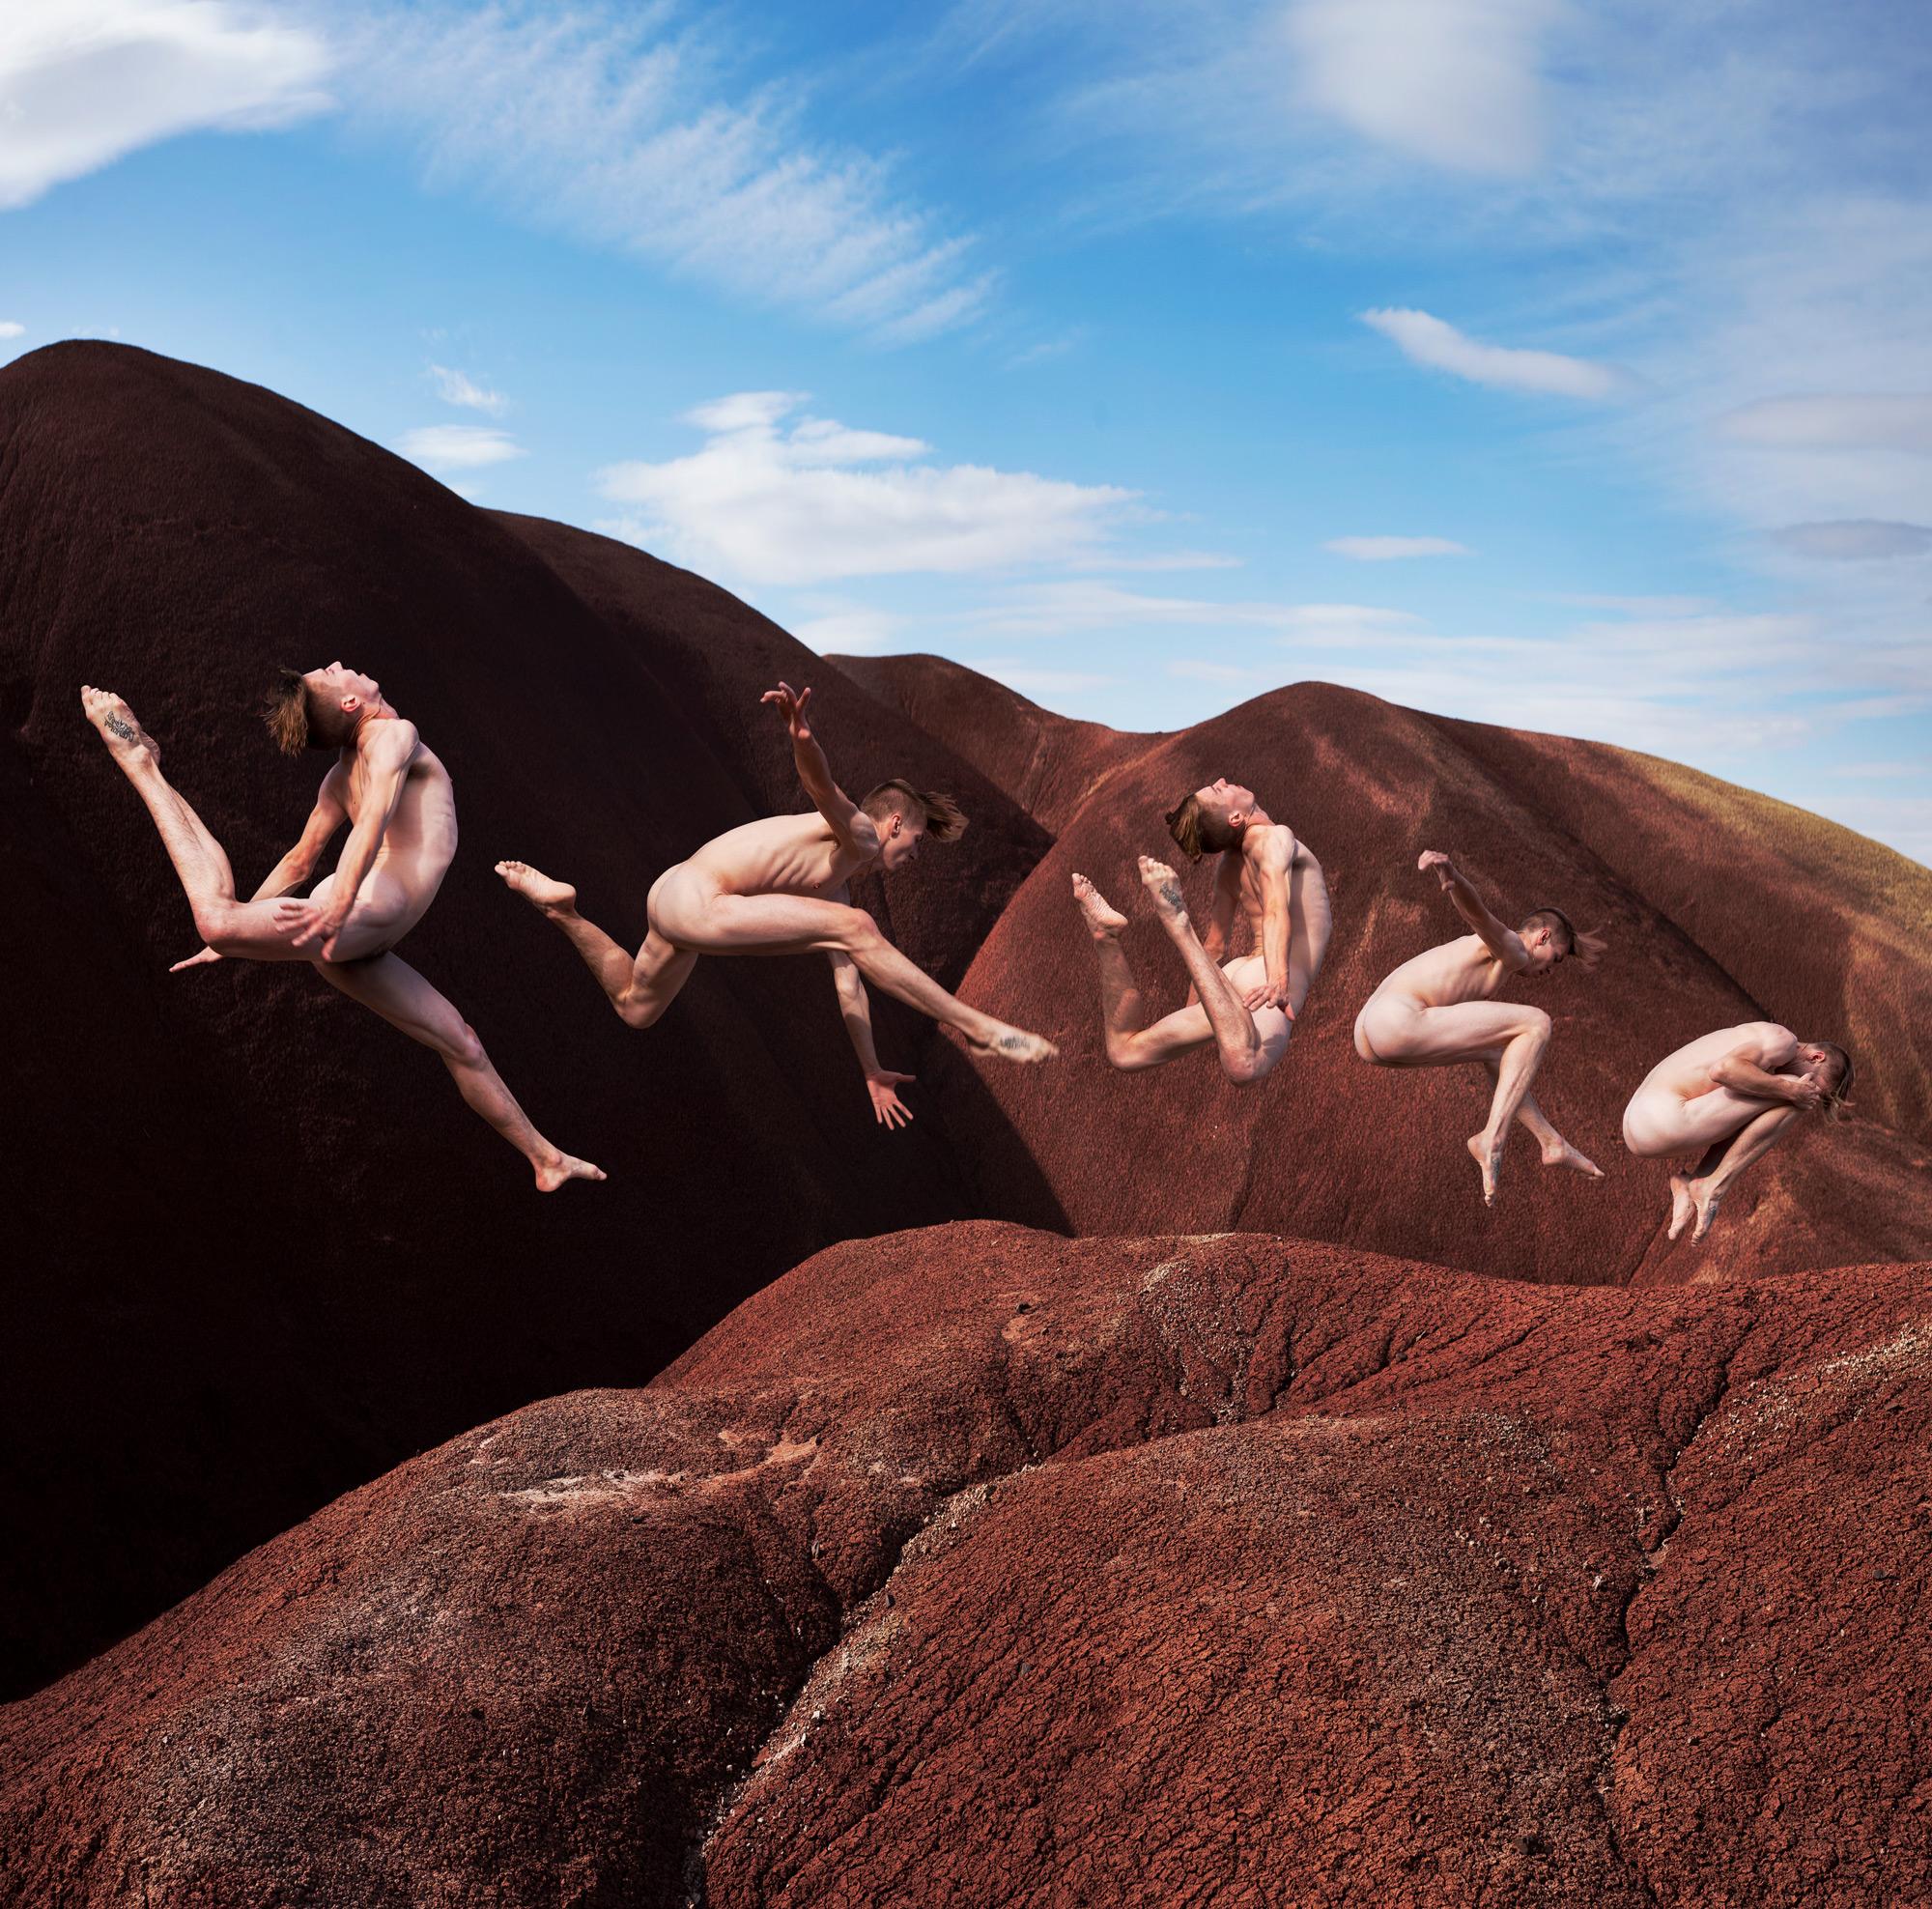 "Evolution Of Jump" Photography 20" x 20" inch Ed. 1/36 by Rob Woodcox